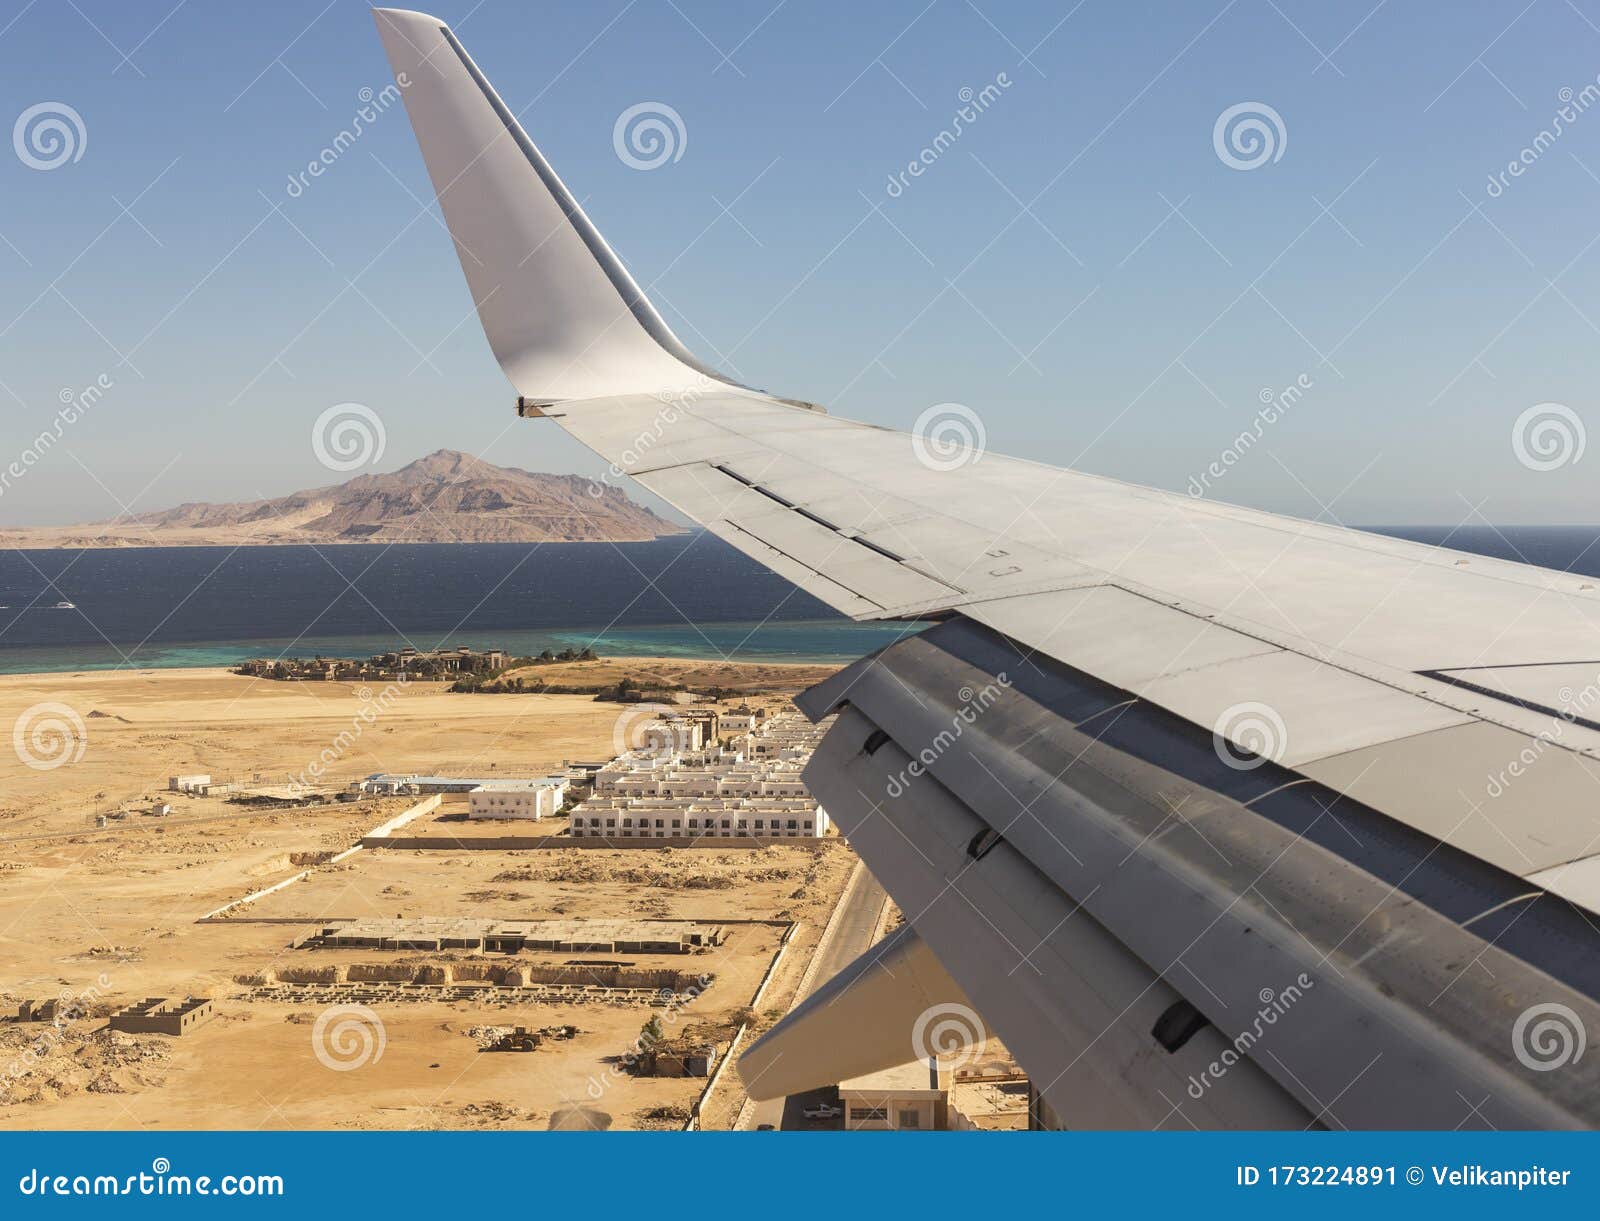 The Plane Lands On The Airfield. Spoilers And Flaps Trailing Edge When  Landing Stock Image - Image Of Land, Landing: 173224891